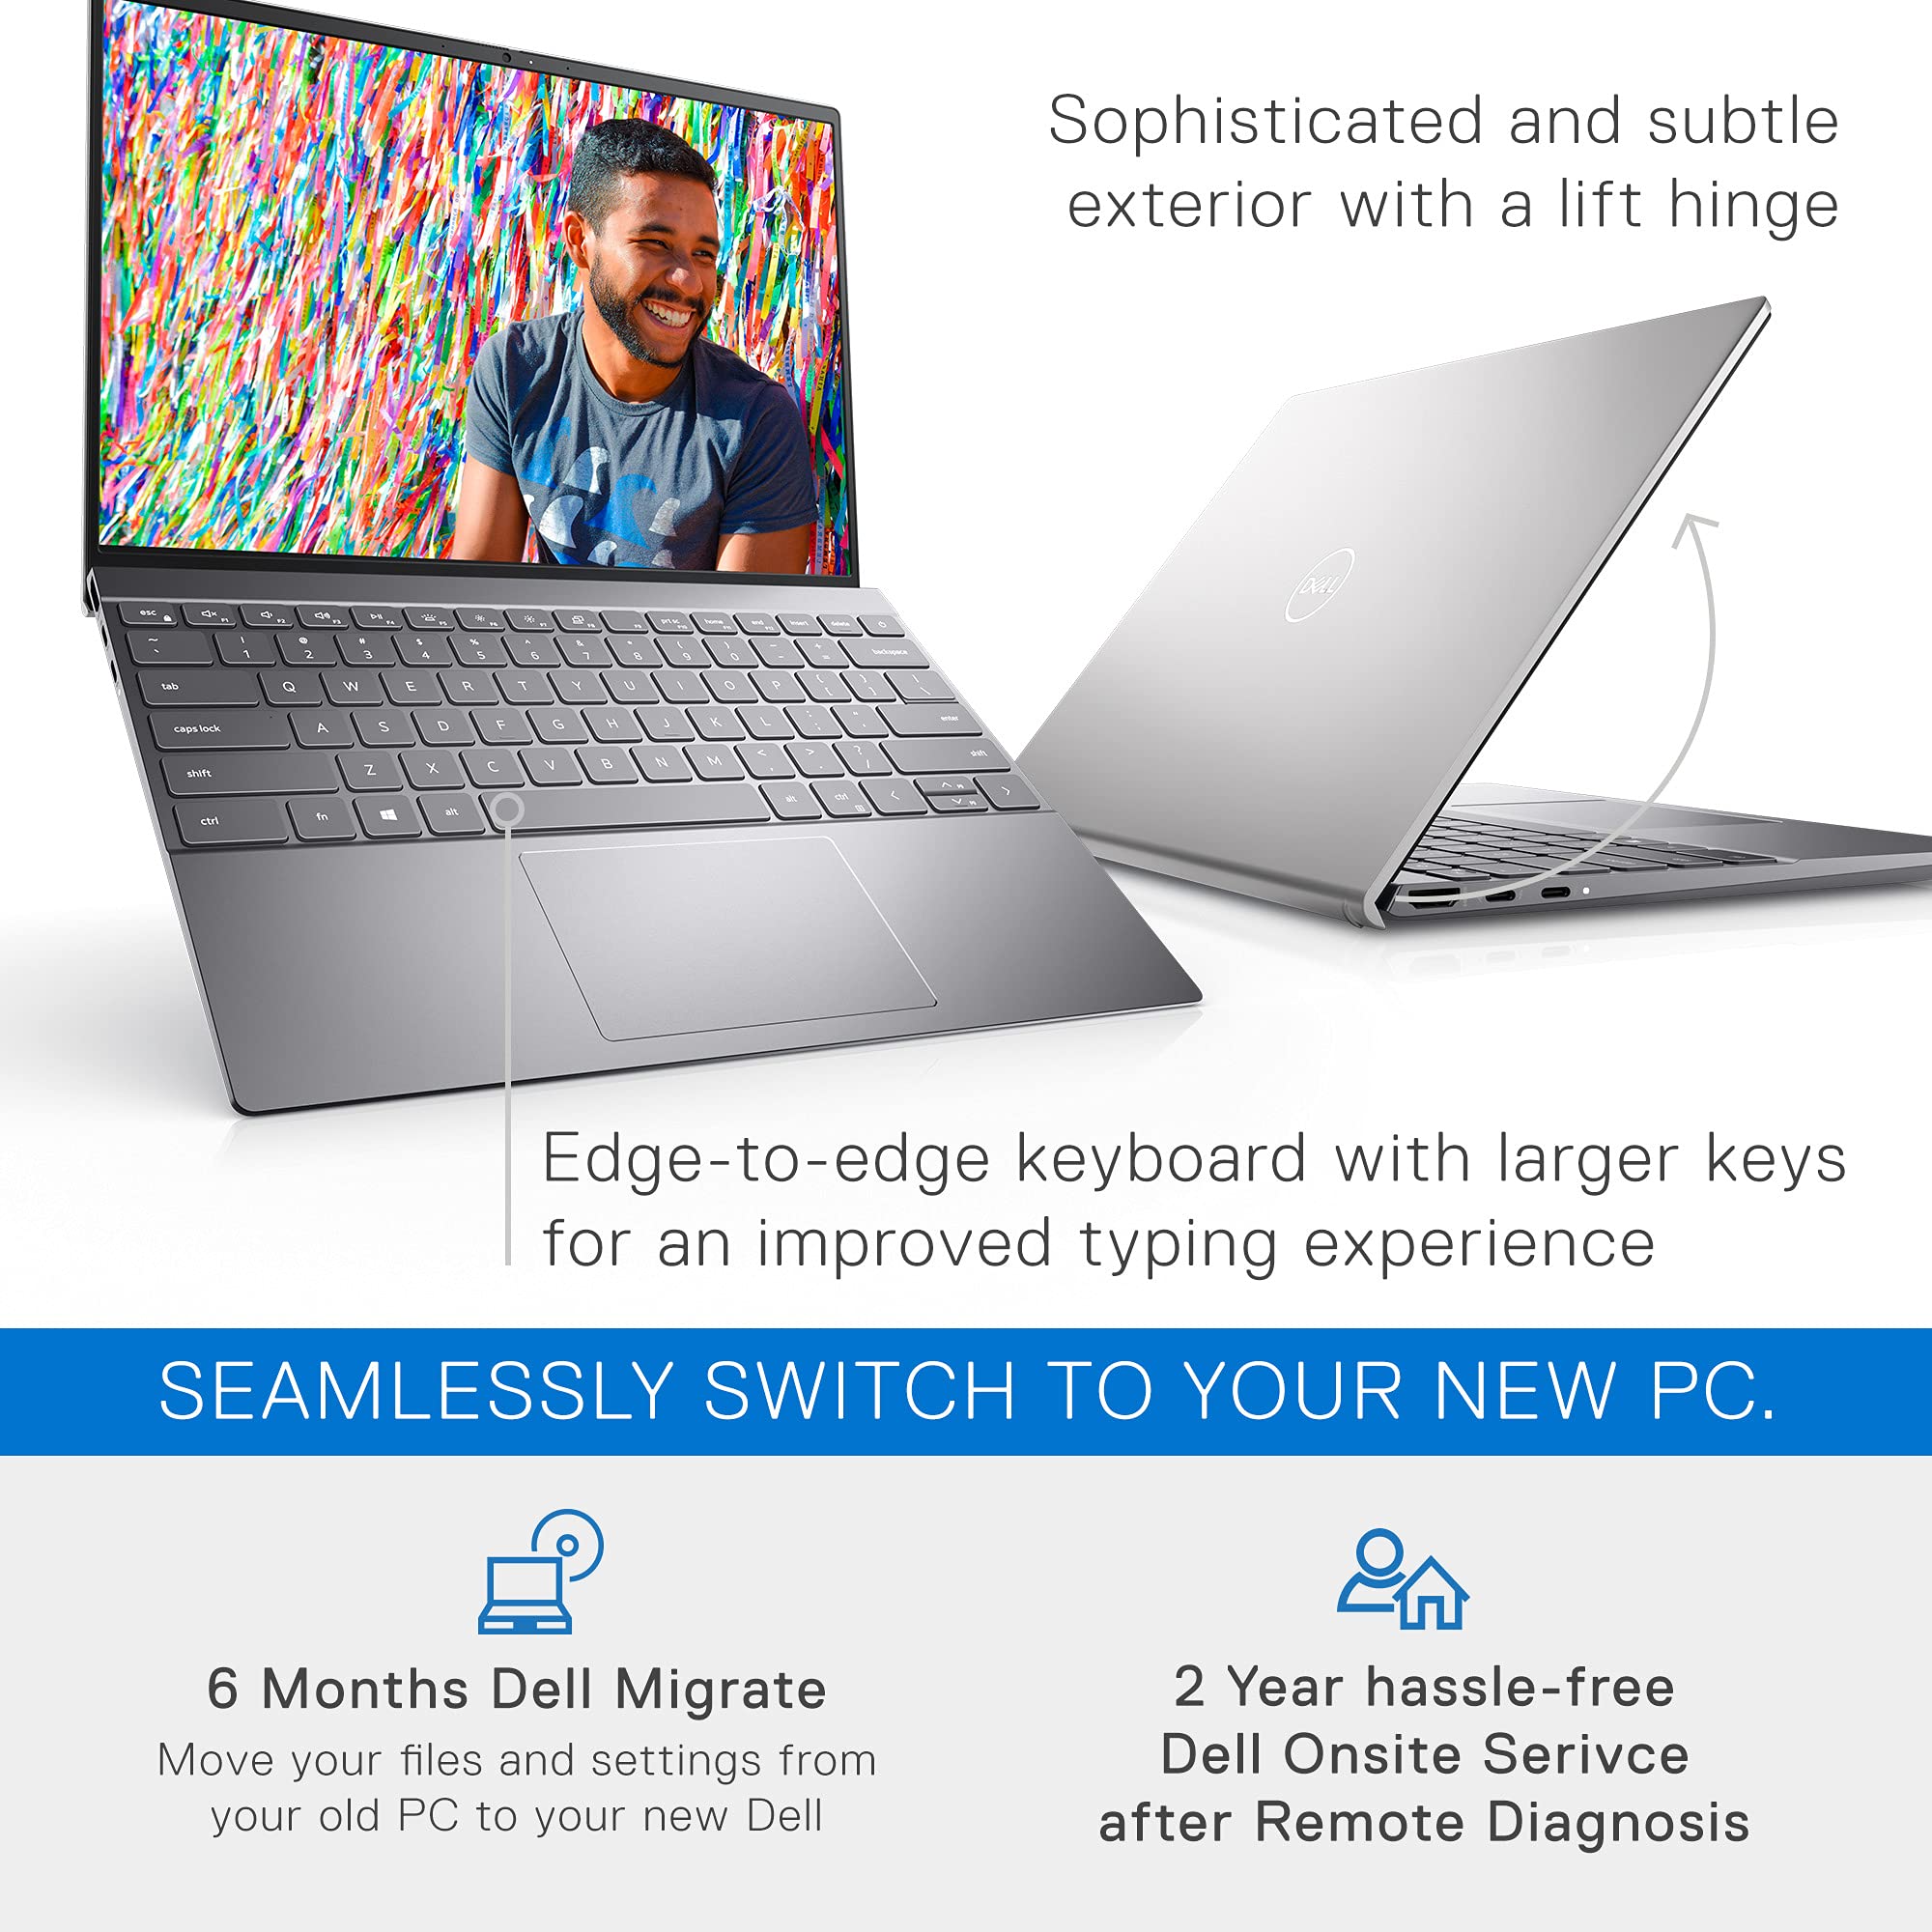 Dell Inspiron 13 5310, 13.3 inch QHD (Quad High Definition) Laptop - Thin and Light Intel Core i7-11370H, 16GB DDR4 RAM, 512GB SSD, NVIDIA GeForce MX450, Services - Windows 10 Home